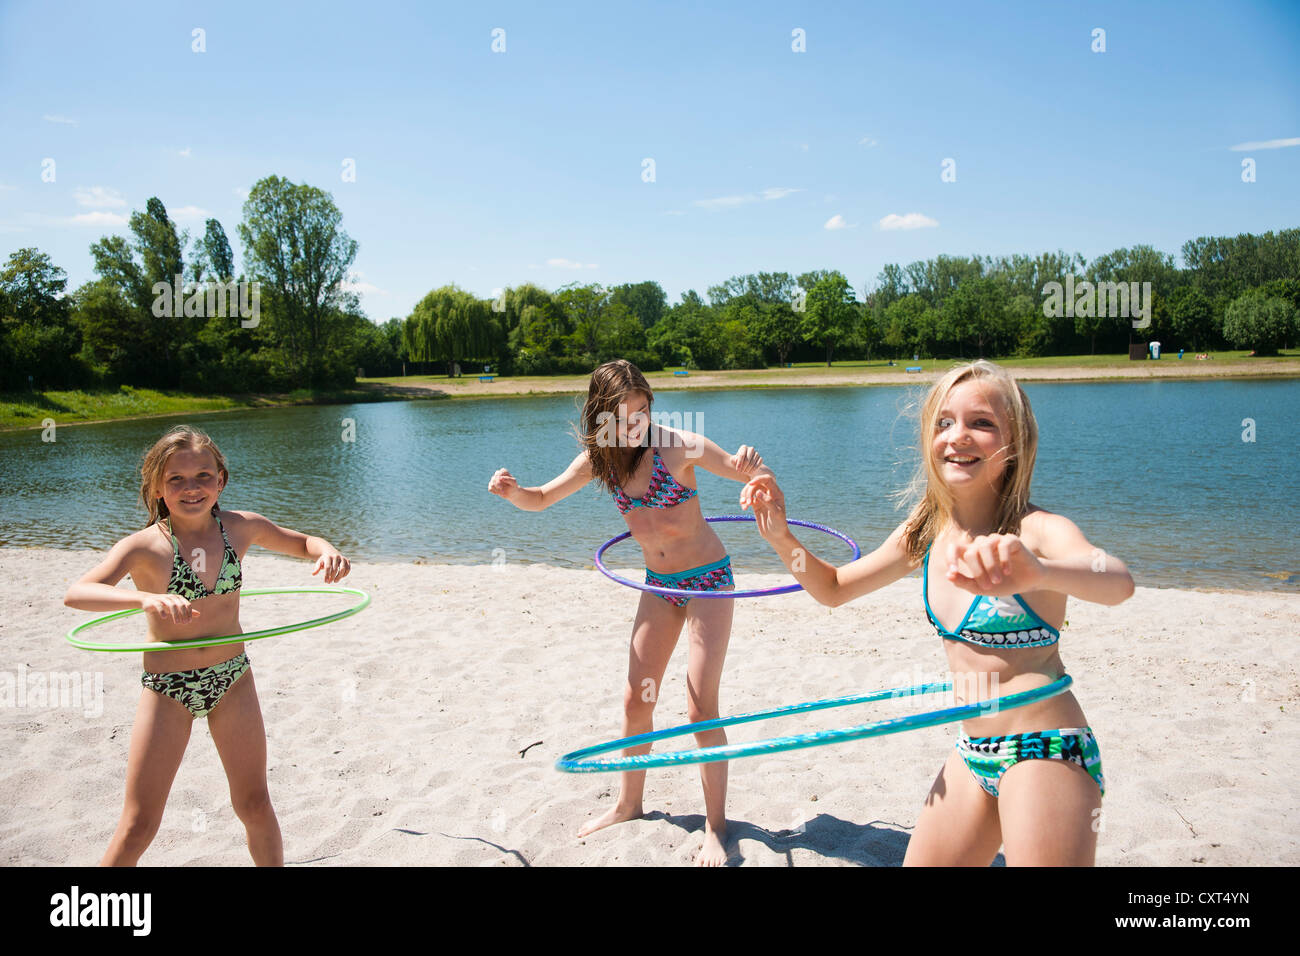 Girls playing with hula-hoops on the beach of a lake Stock Photo